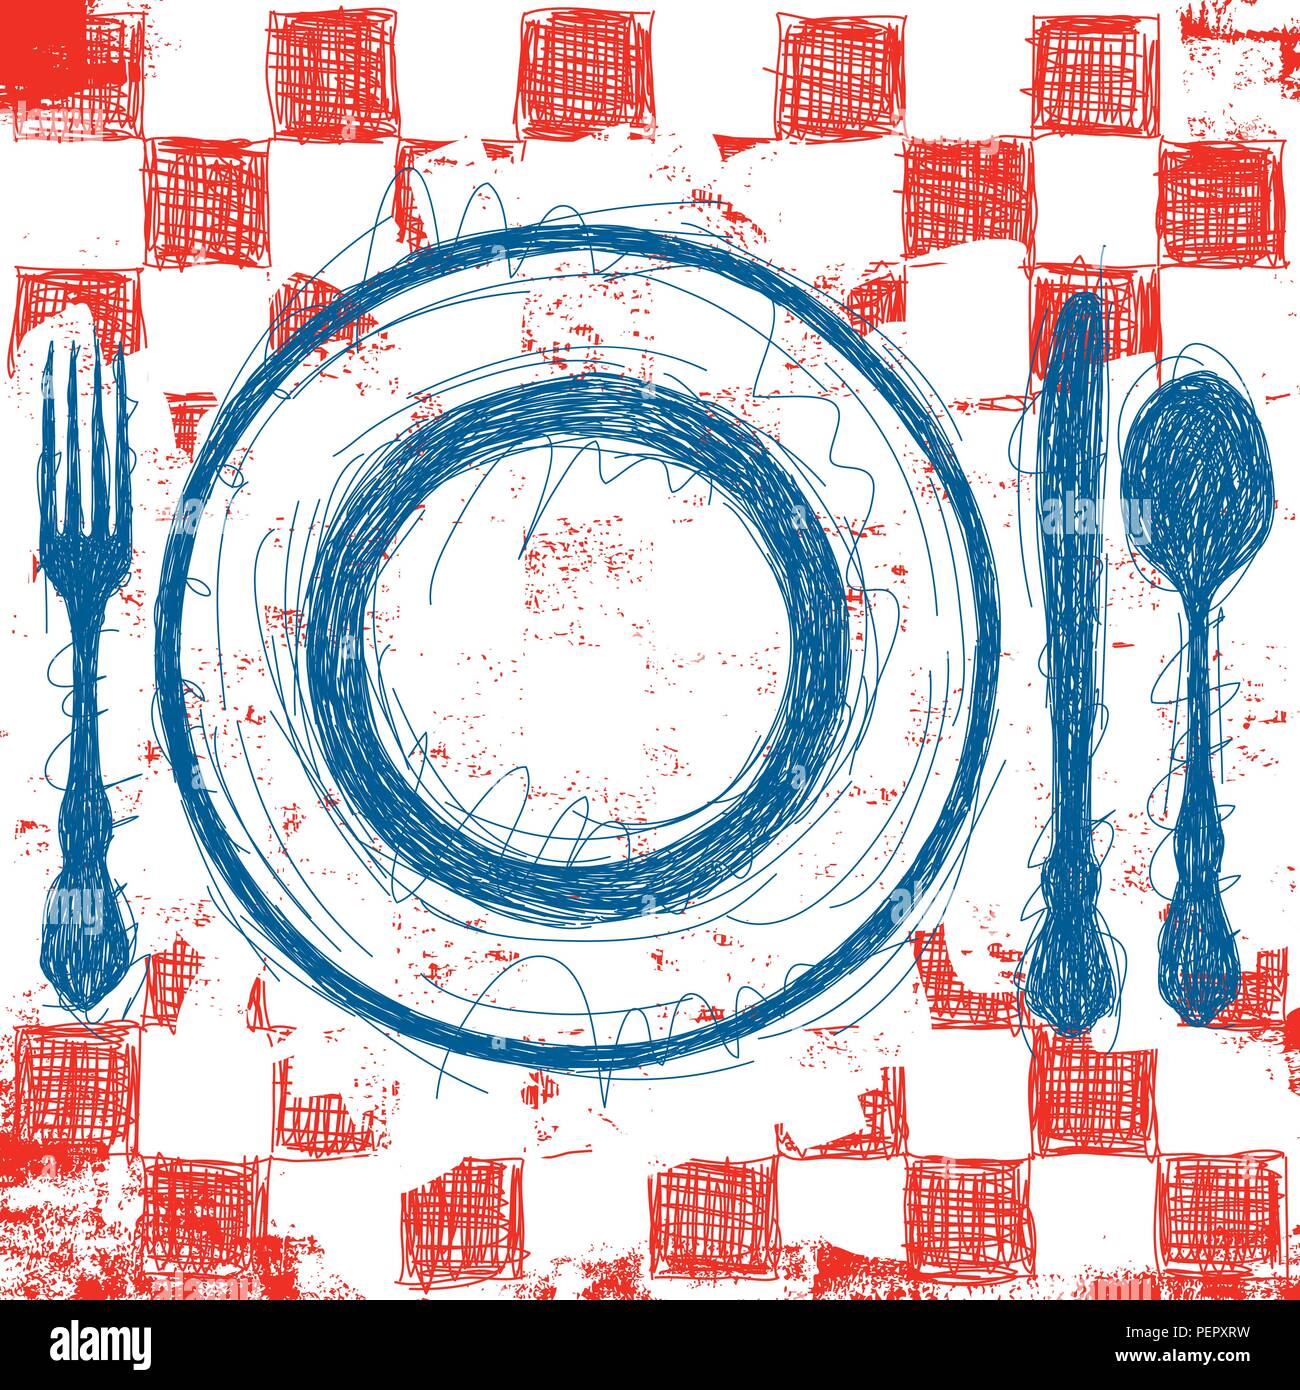 Blue Plate Special. Sketchy, hand drawn blue plate and silverware over an abstract red, checkerboard tablecloth background. Stock Vector